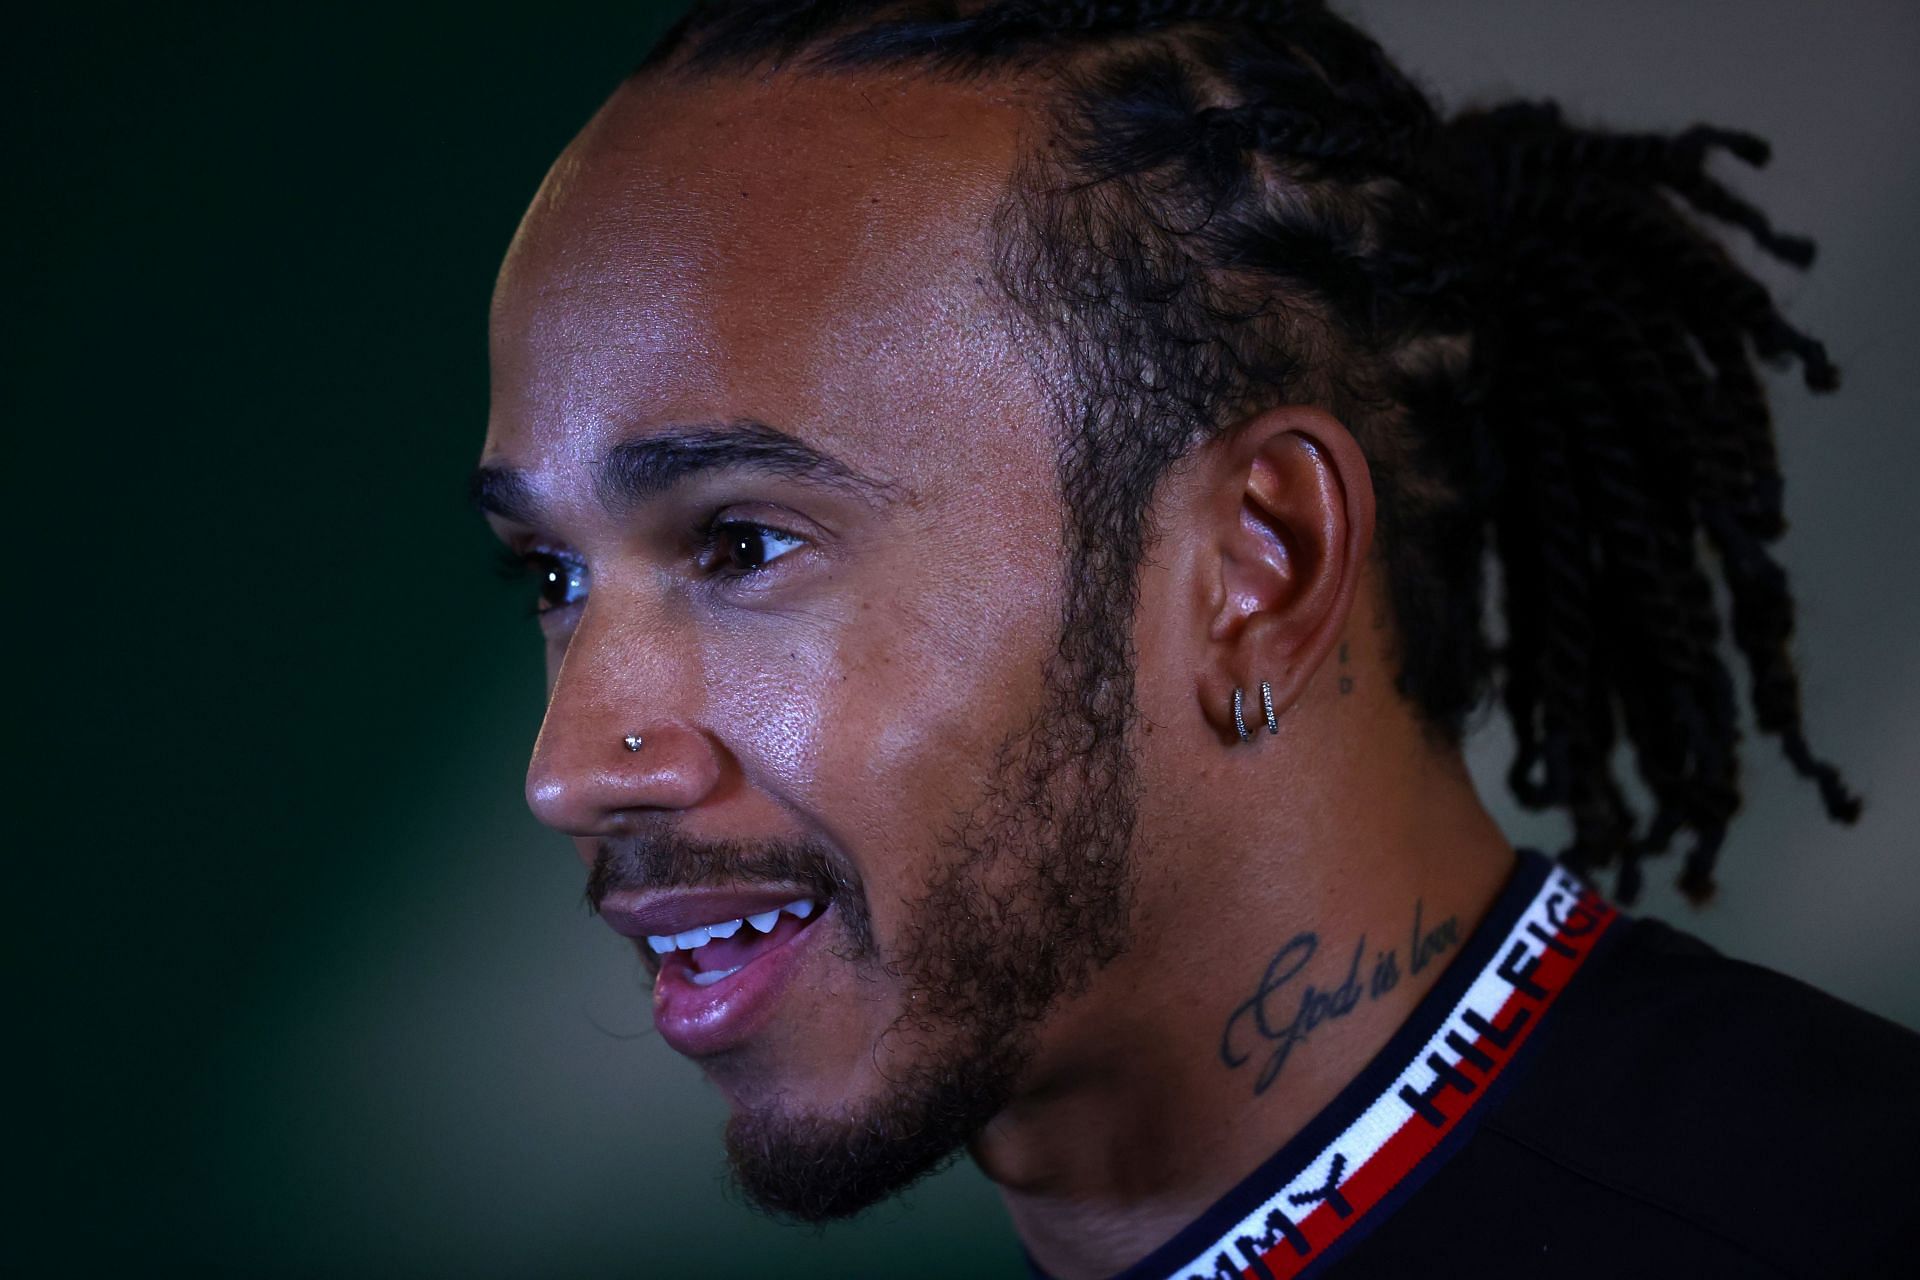 Lewis Hamilton talks to the media in the Paddock ahead of the 2021 season finale in Abu Dhabi (Photo by Clive Rose/Getty Images)